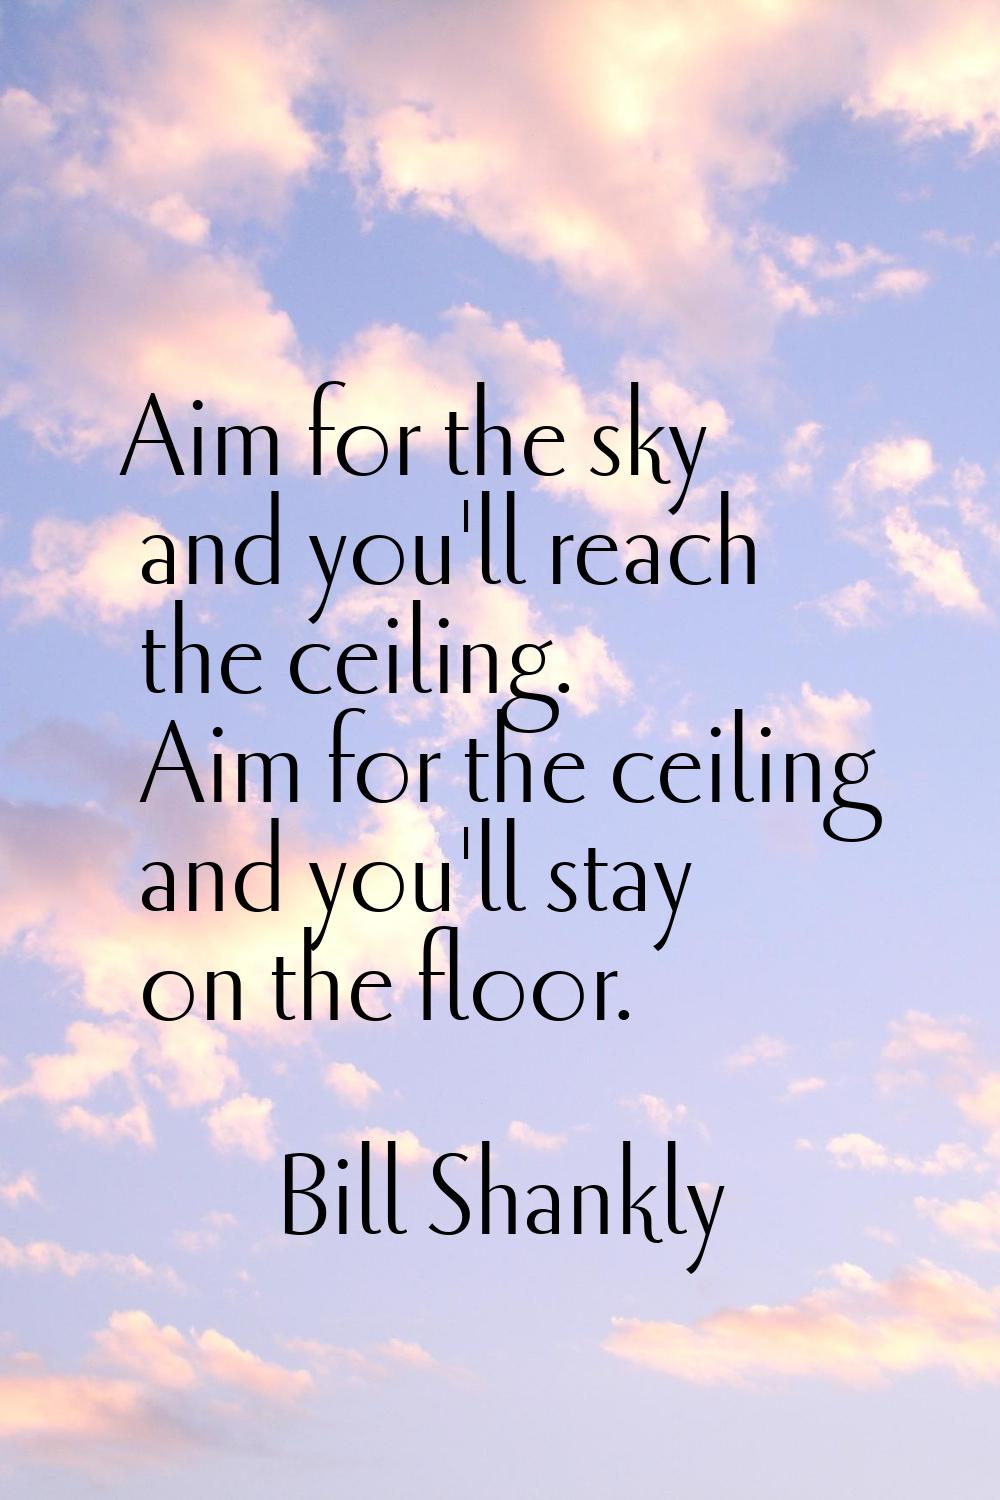 Aim for the sky and you'll reach the ceiling. Aim for the ceiling and you'll stay on the floor.